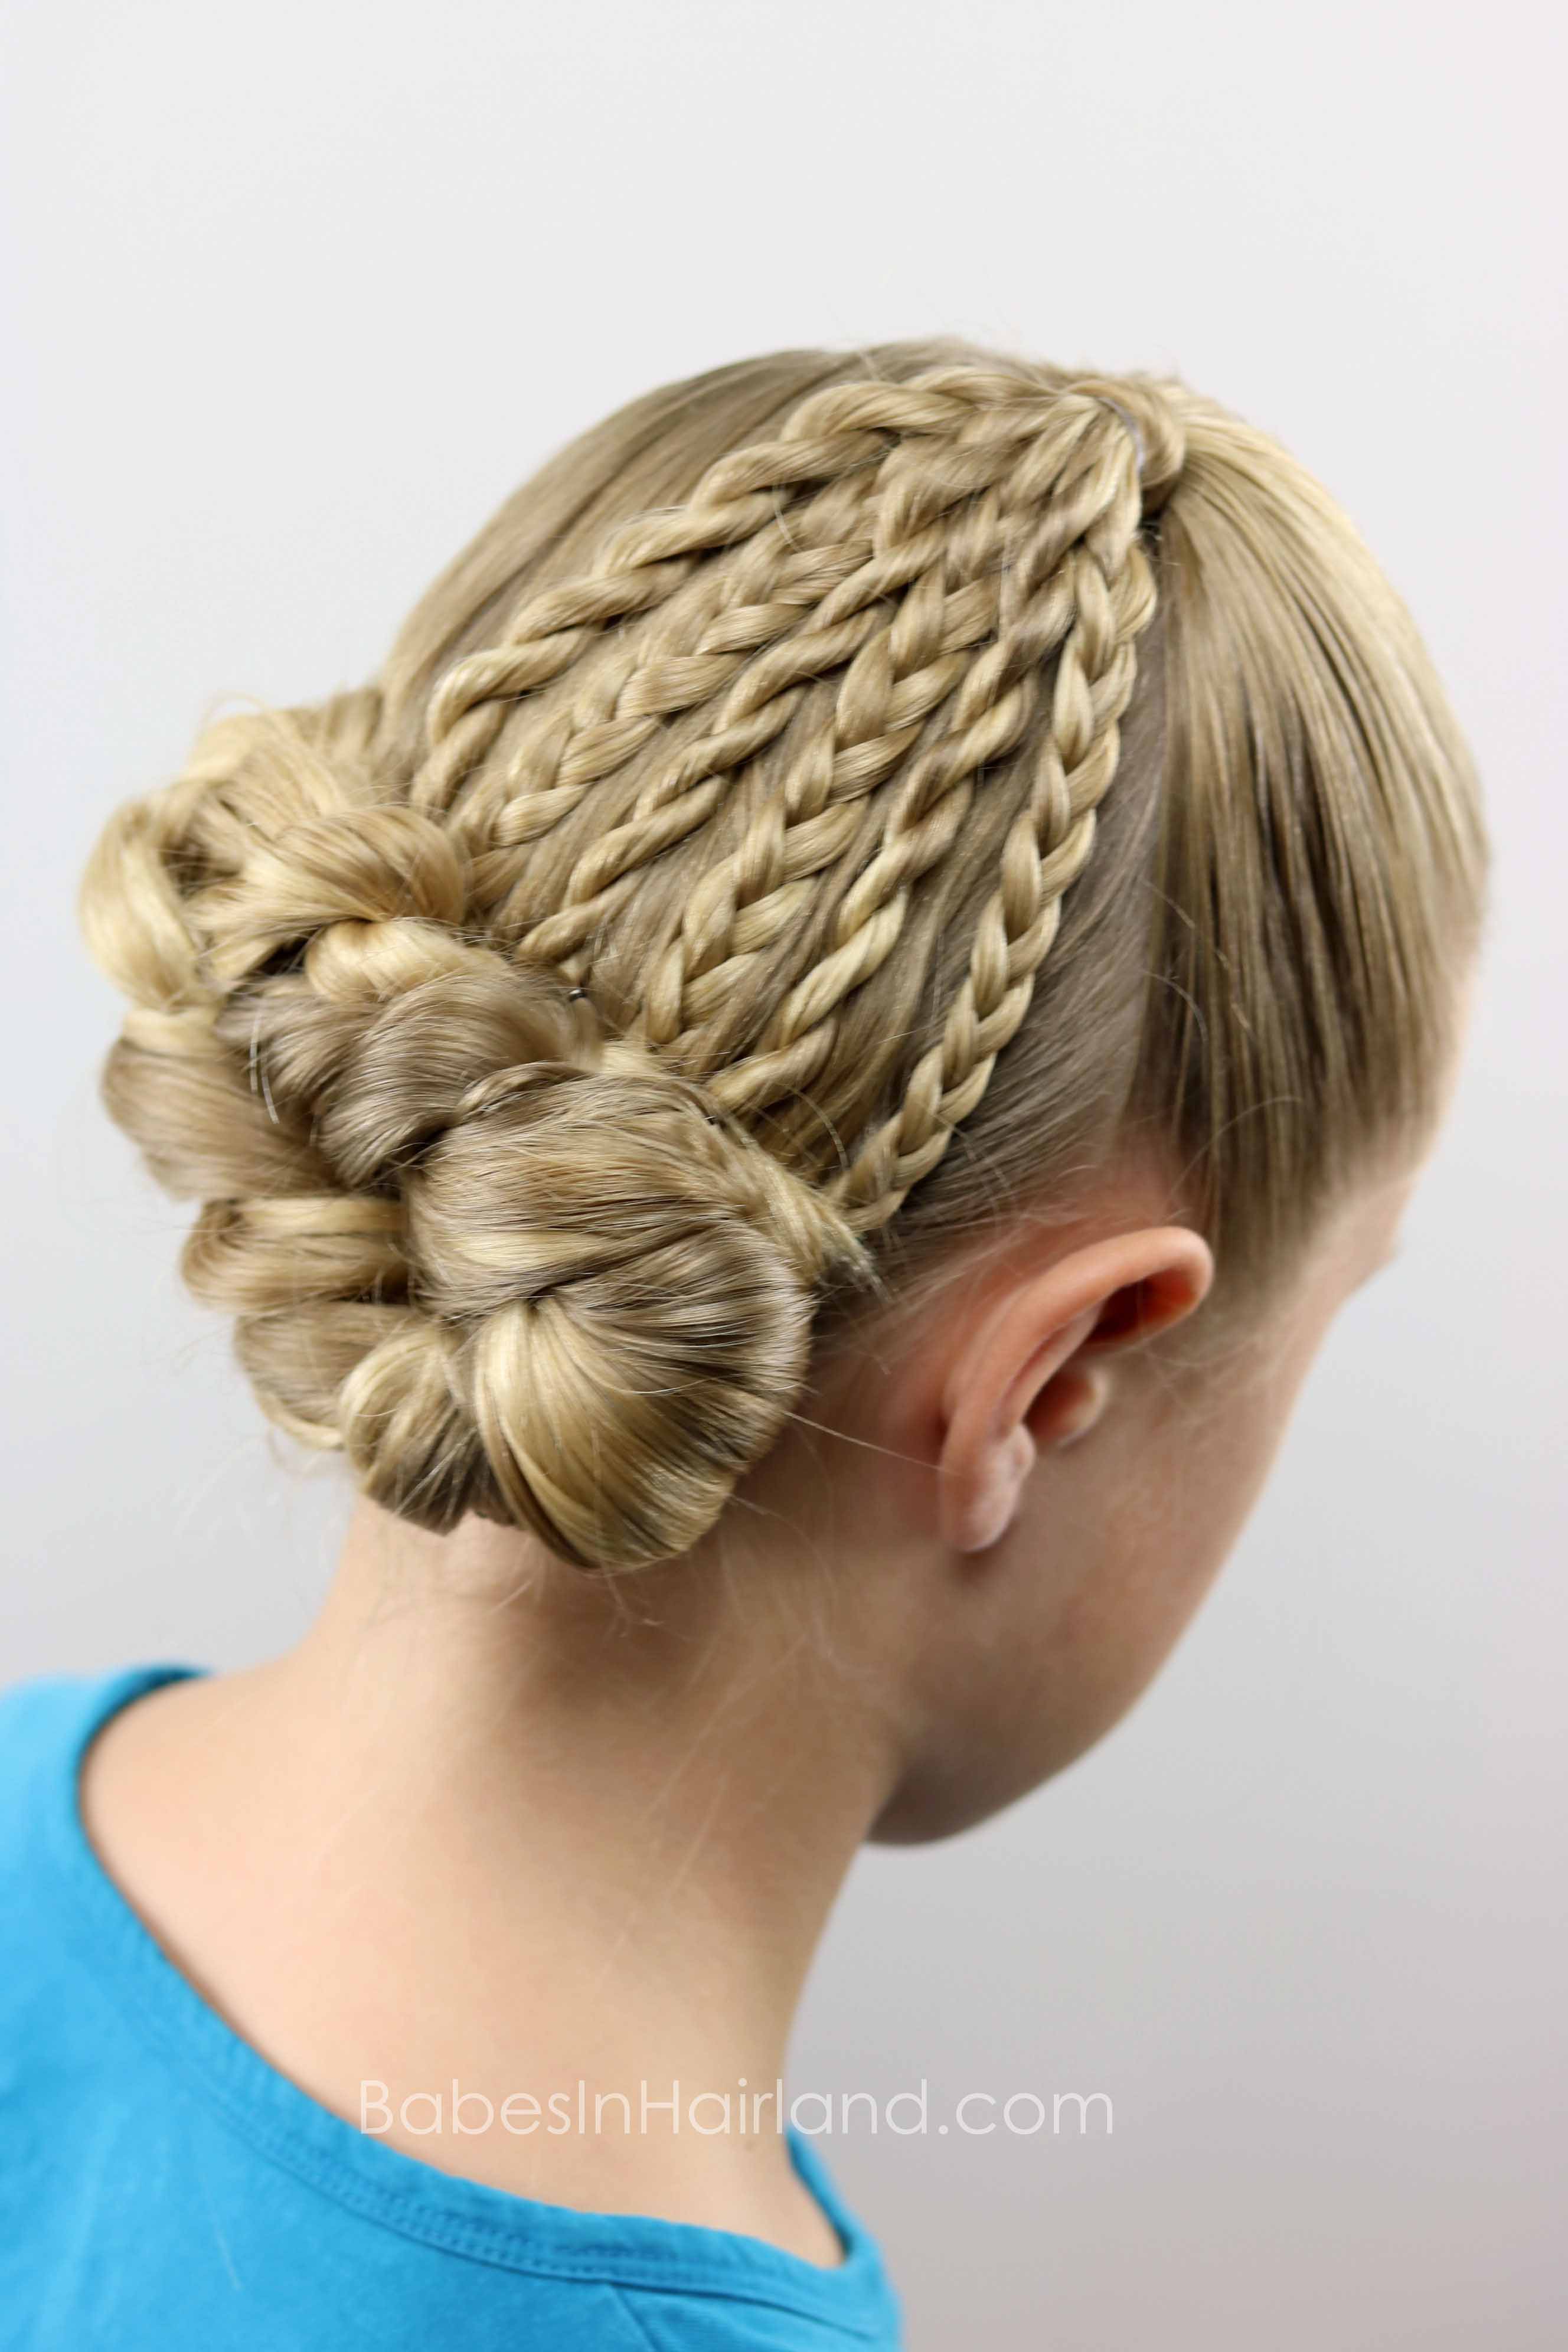 Braids and Twists Updo | A Perfect and Easy Updo for Summer